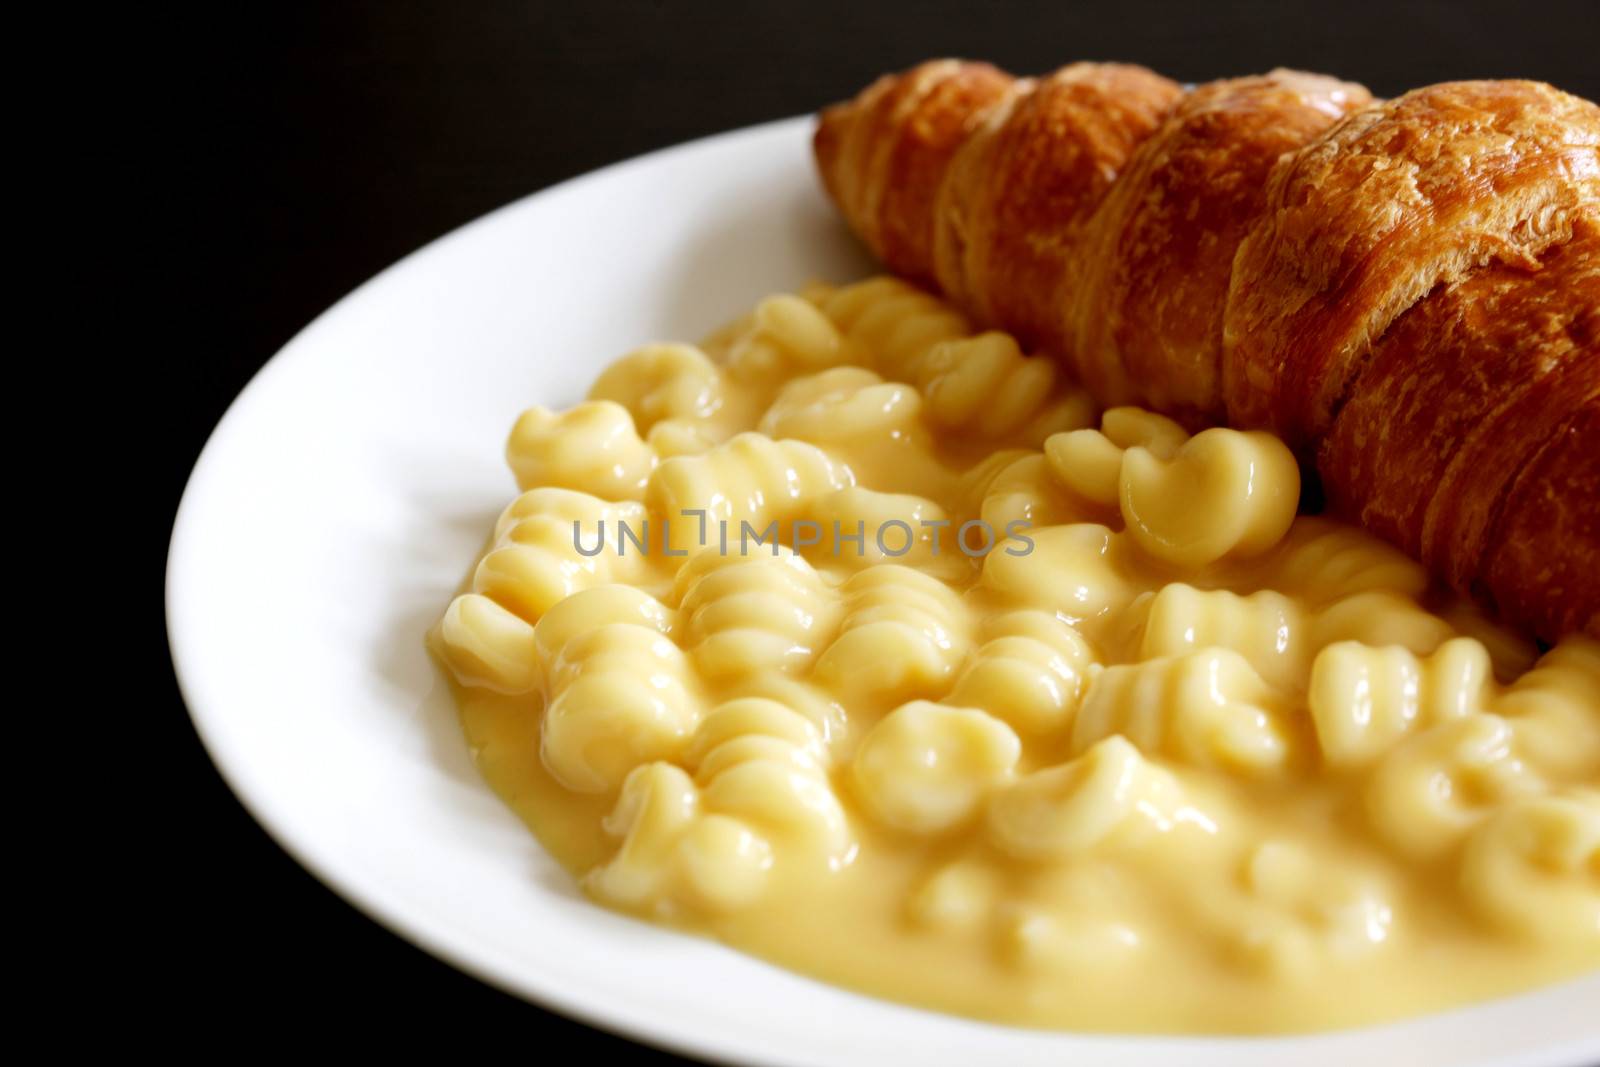 Croissant with Pasta Shapes by Whiteboxmedia